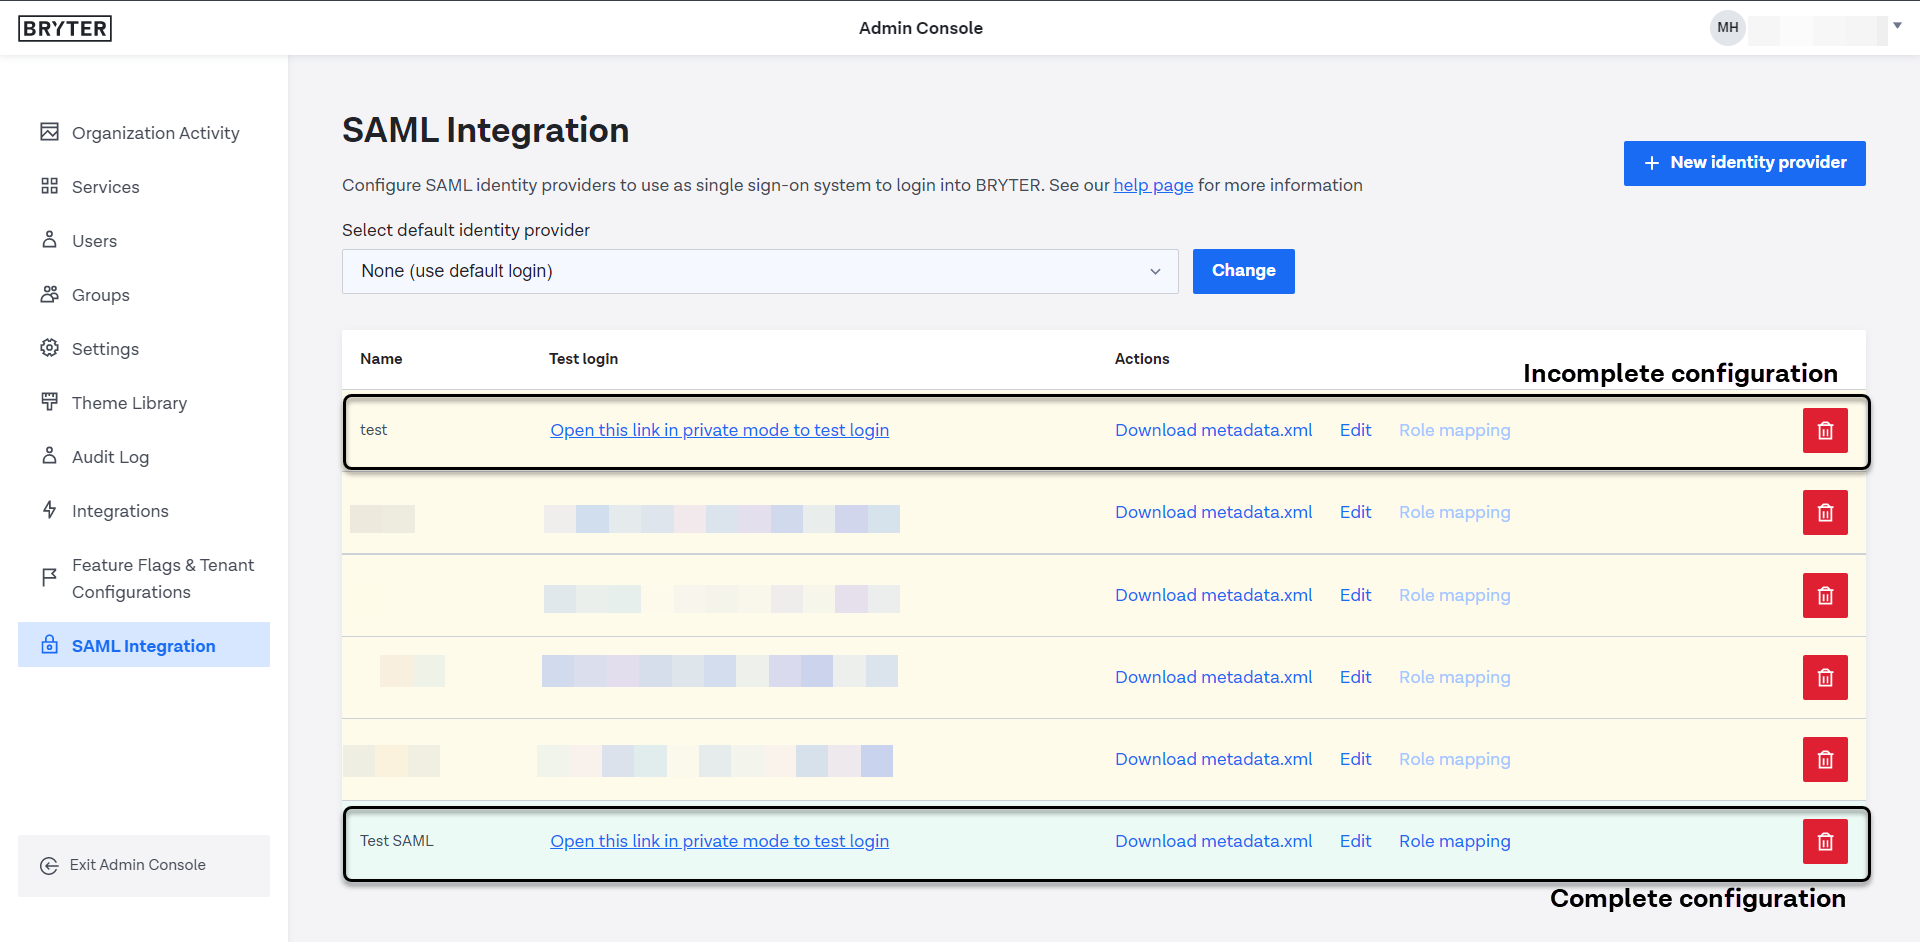 The SAML integration page is the location of all the functionality you will need to create and configure SAML.